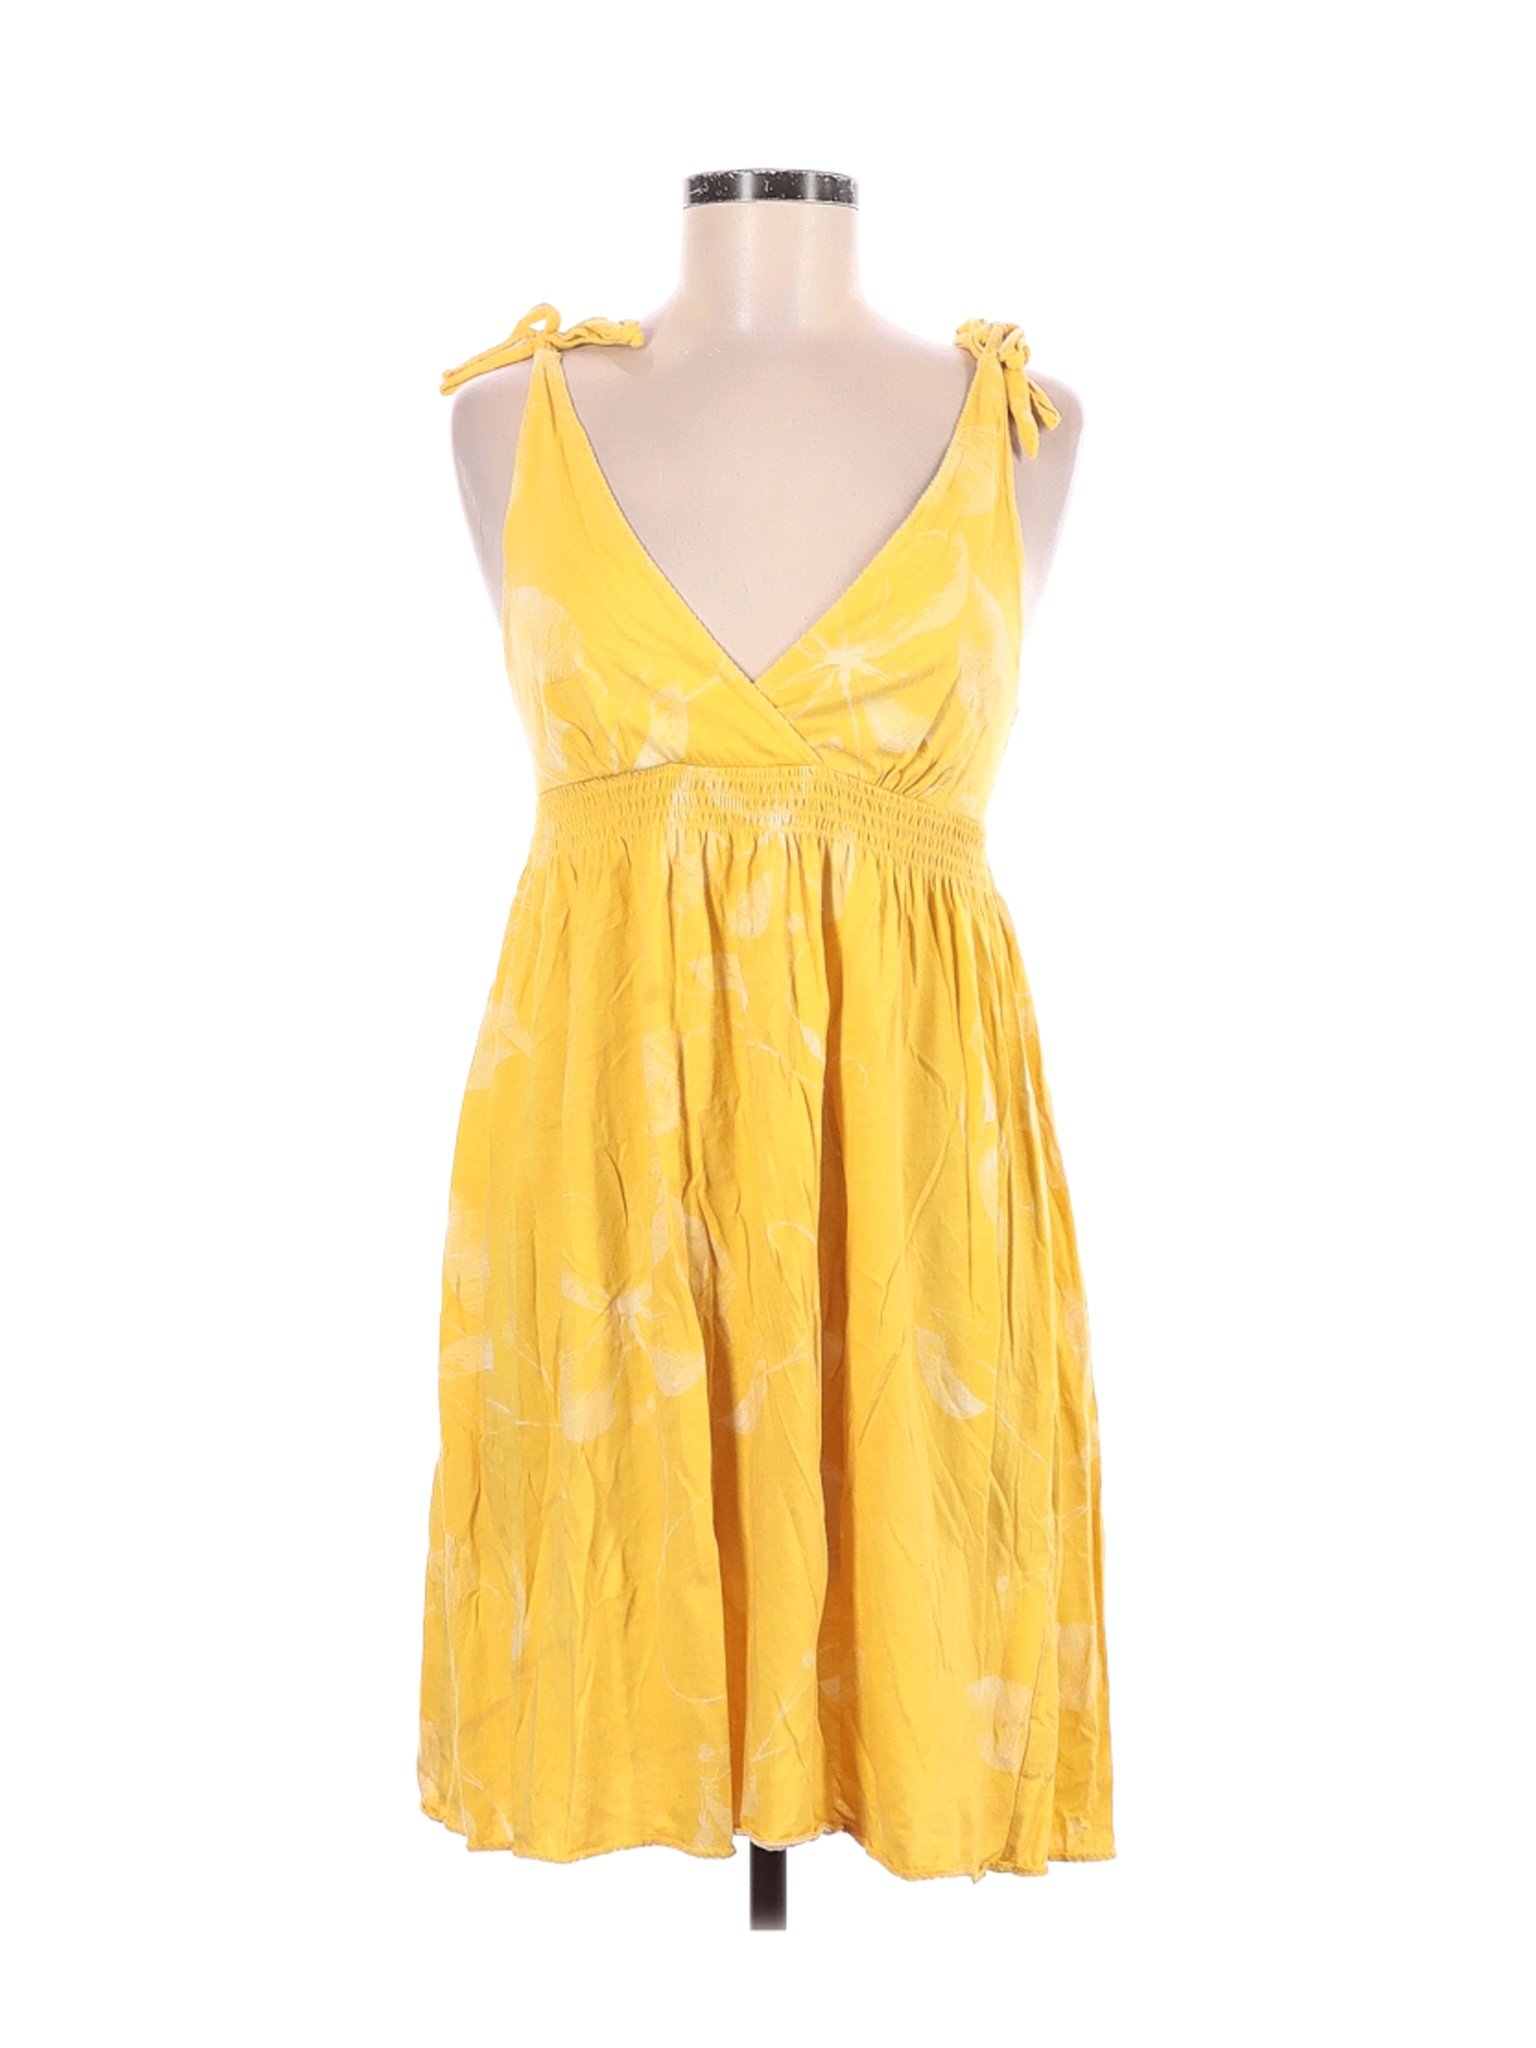 American Eagle Outfitters Women Yellow Casual Dress M | eBay